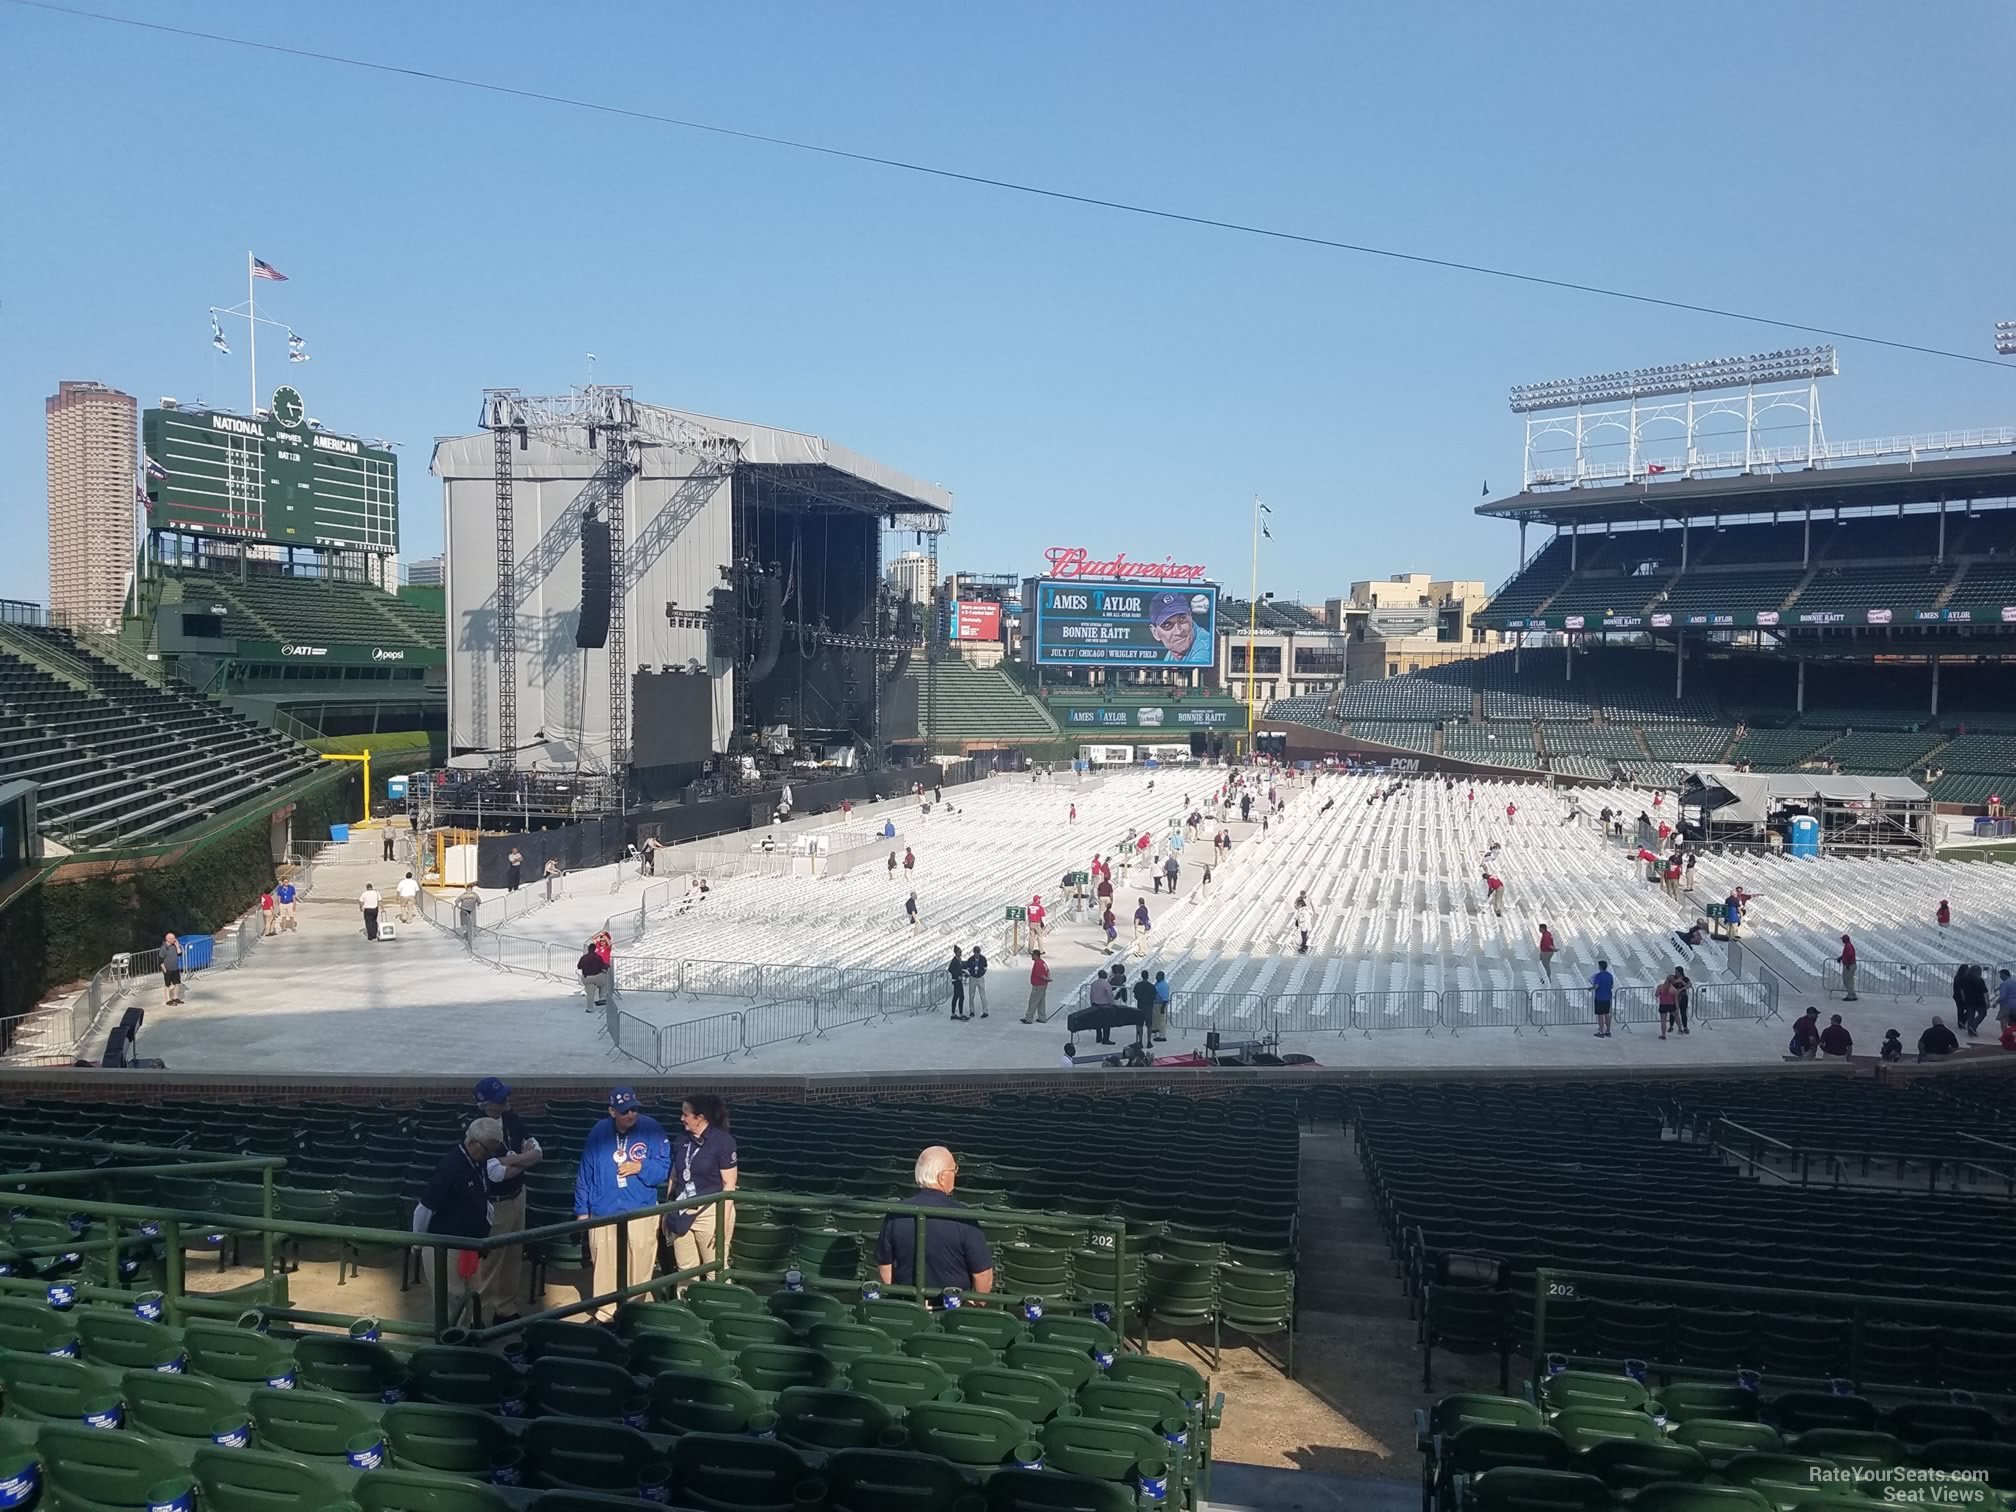 section 203, row 11 seat view  for concert - wrigley field